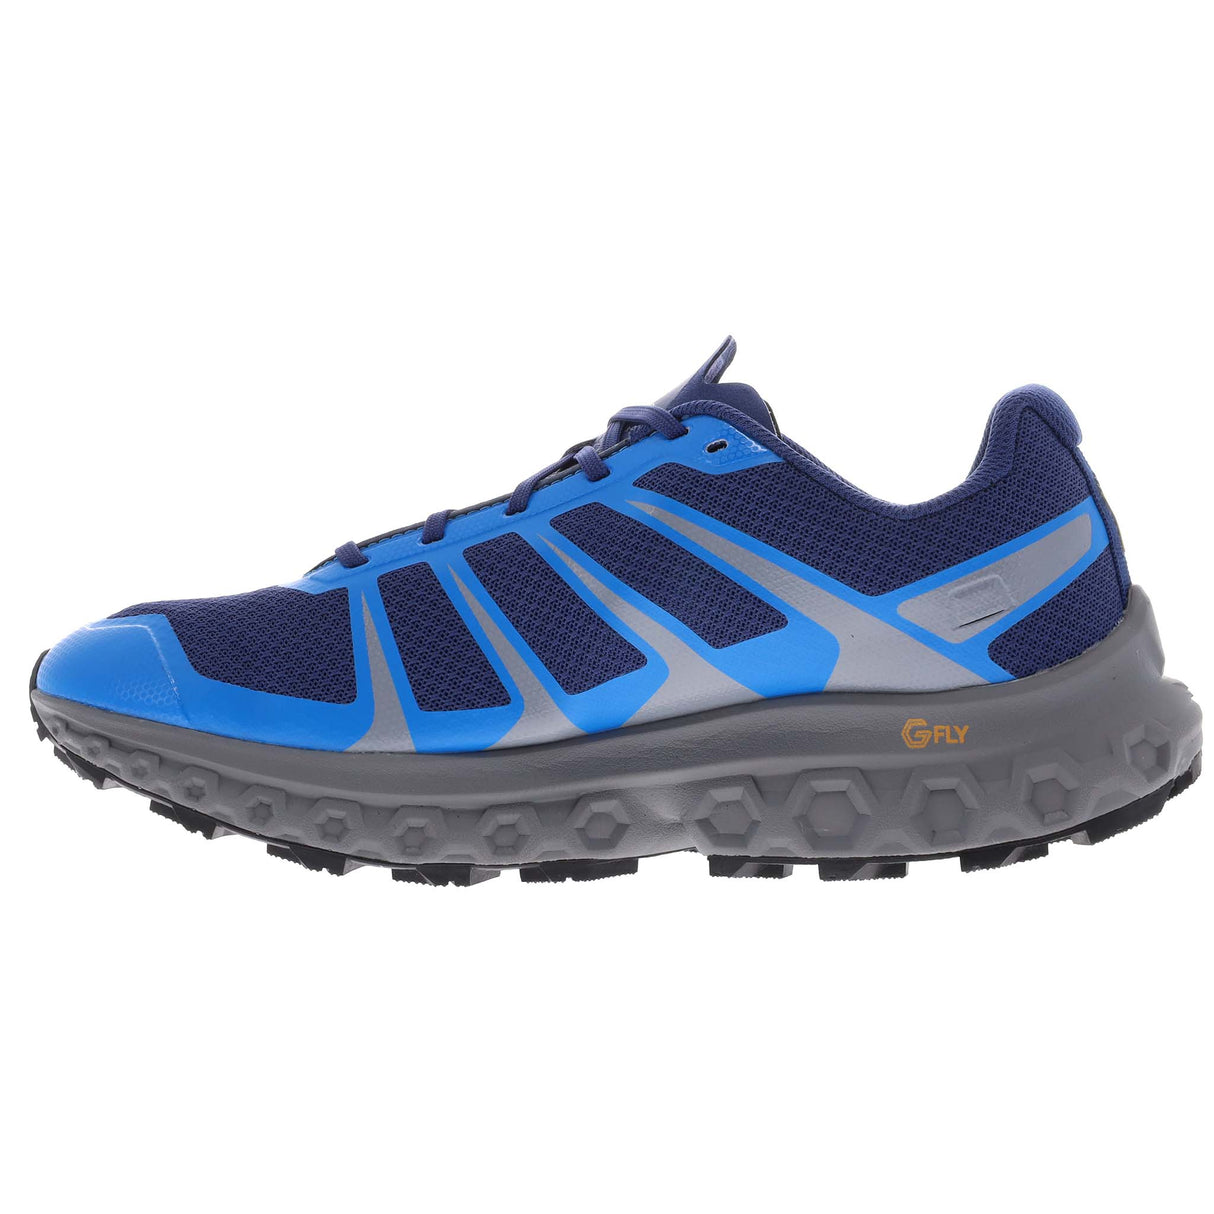 Inov-8 TrailFly Ultra G 300 MAX running trail homme lateral- Bleu / Gris / Nectar